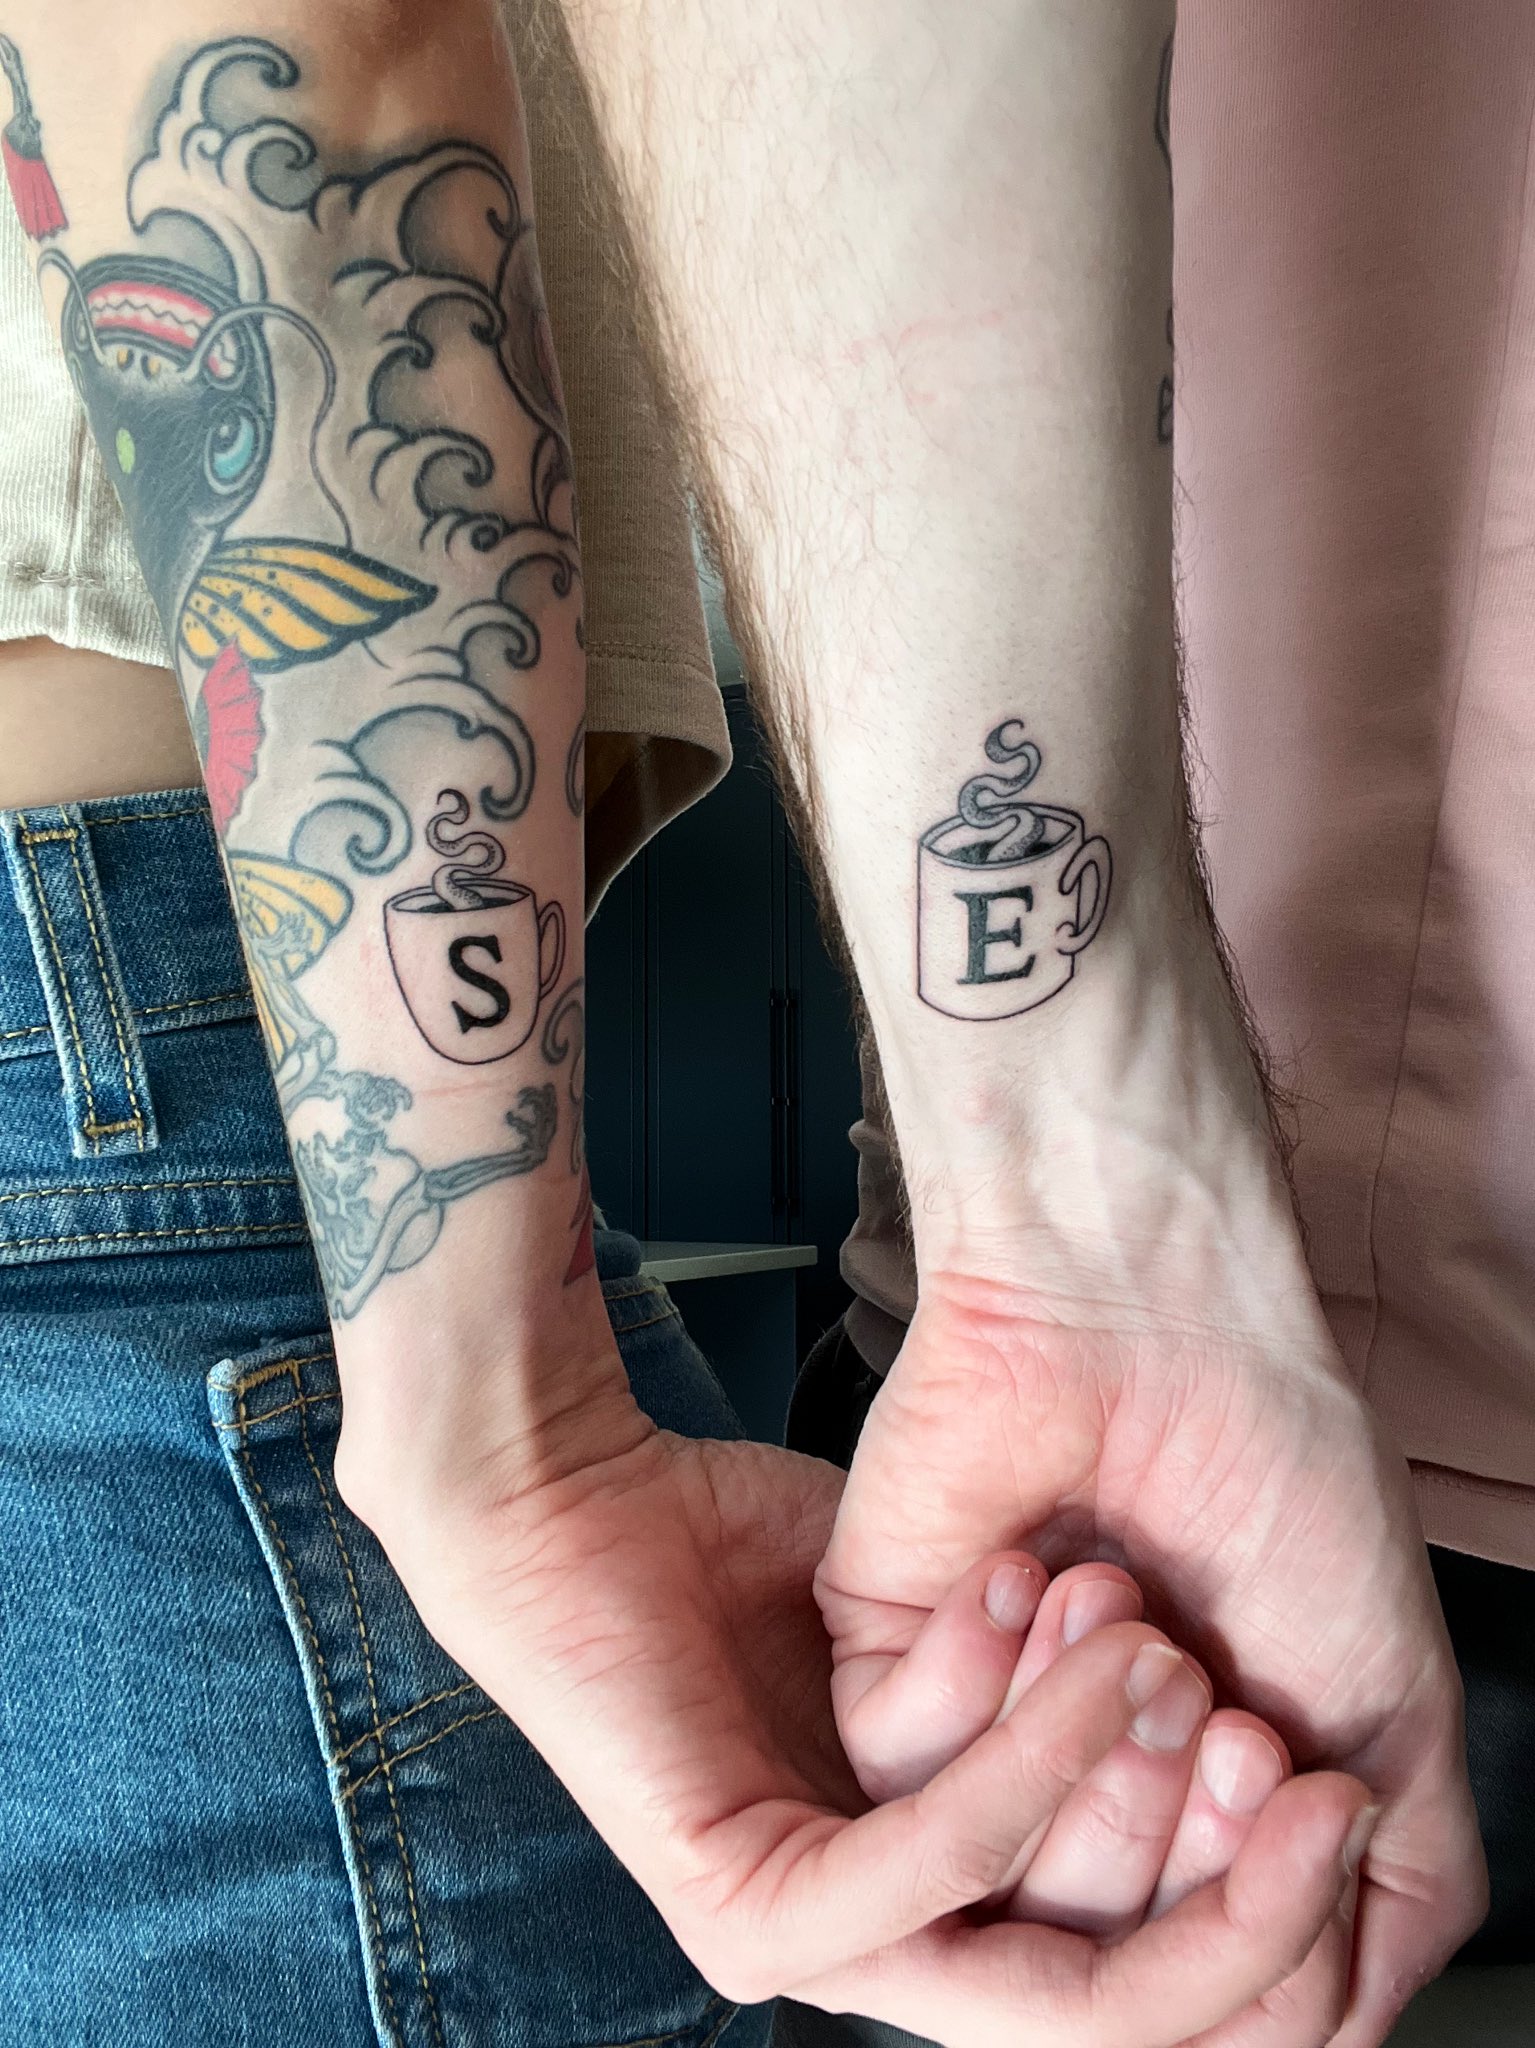 A picture of Jacksepticeye and his girlfriend Evelien Smolders' tattoo